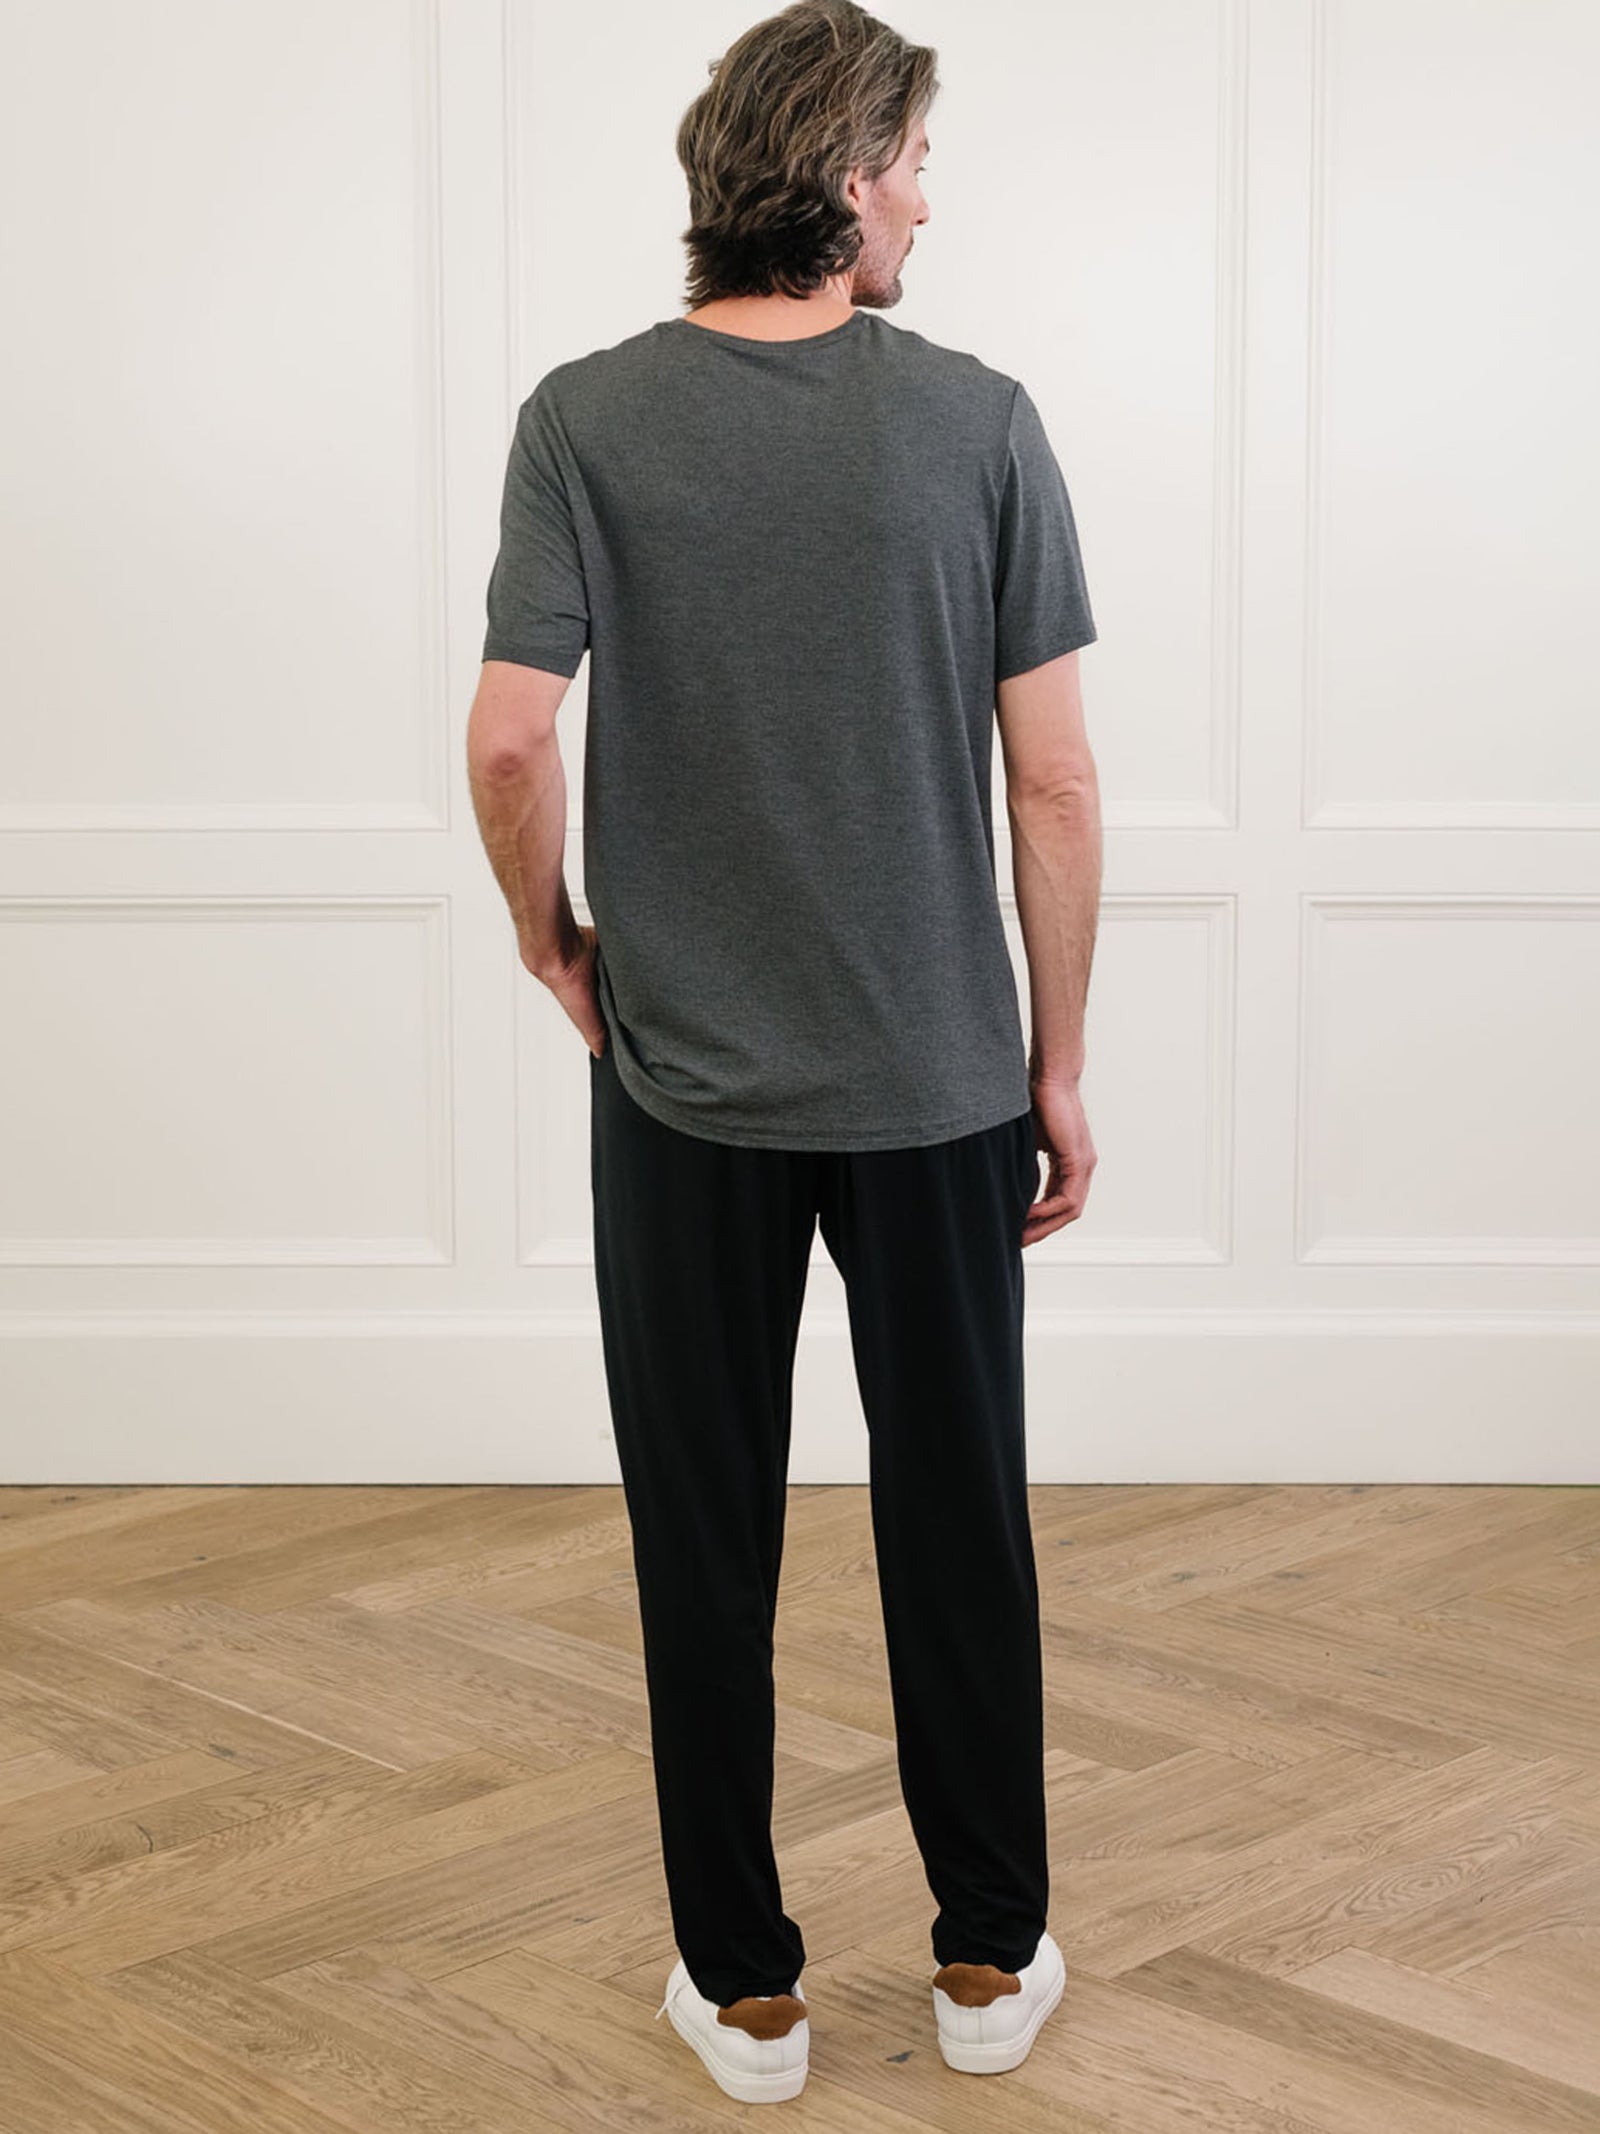 Charcoal Men's Stretch-Knit Bamboo Lounge Tee. A man is wearing the lounge tee in a well lit home with his back facing the camera.